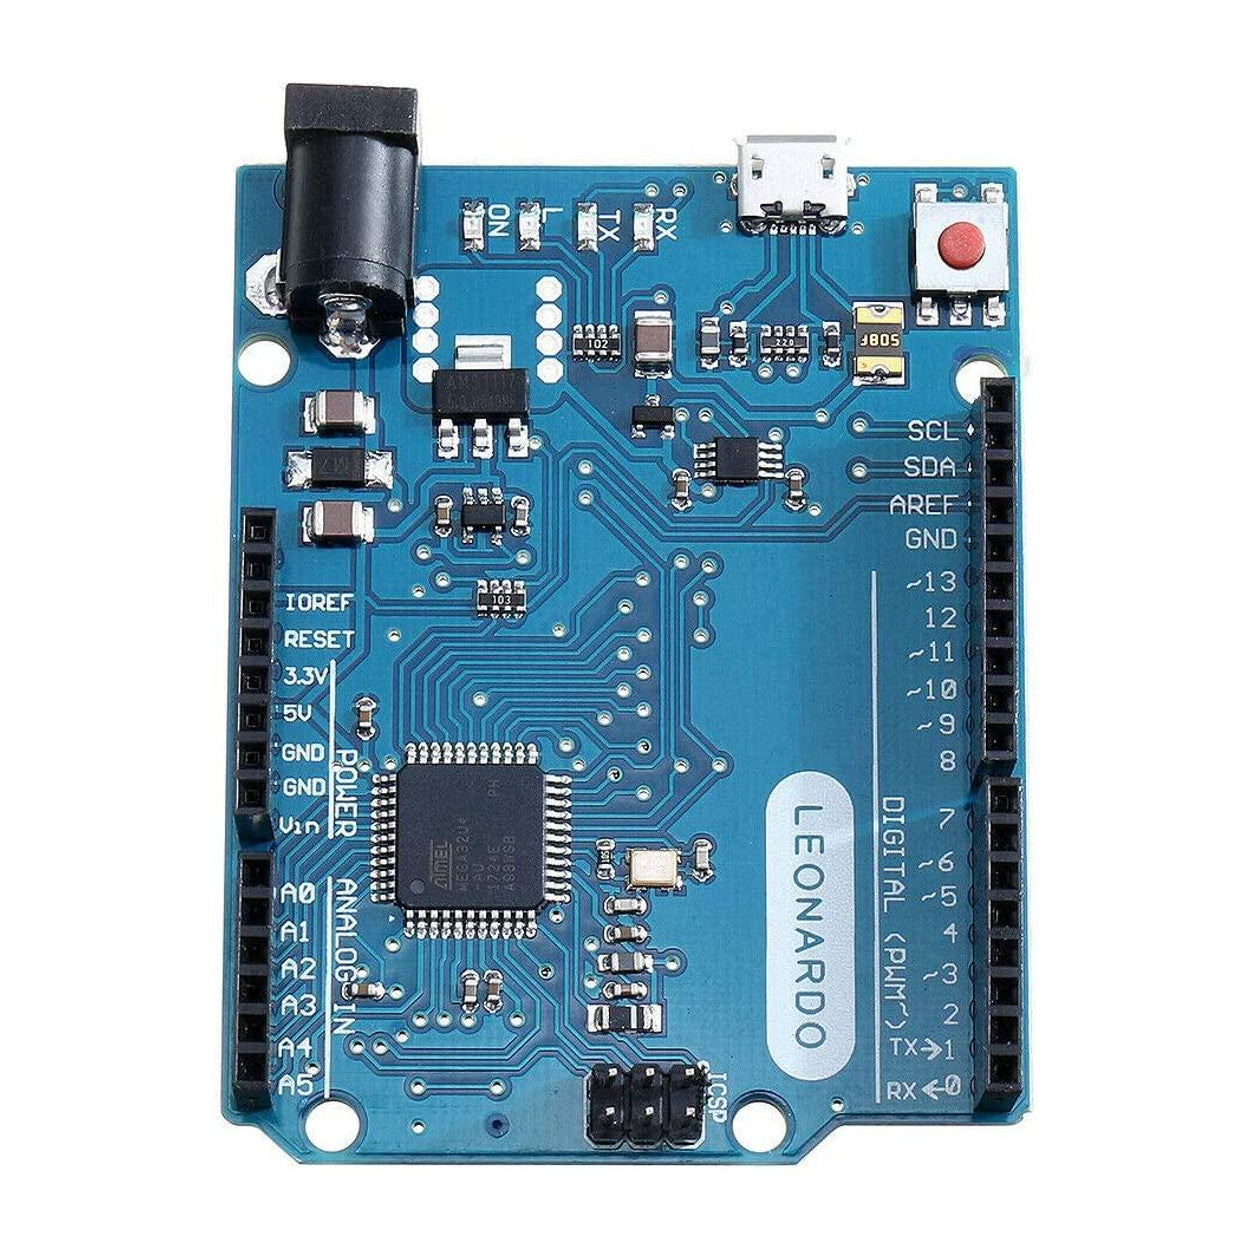 arduino UNO R3 WITH NO USB CABLE Micro Controller Board Electronic Hobby Kit